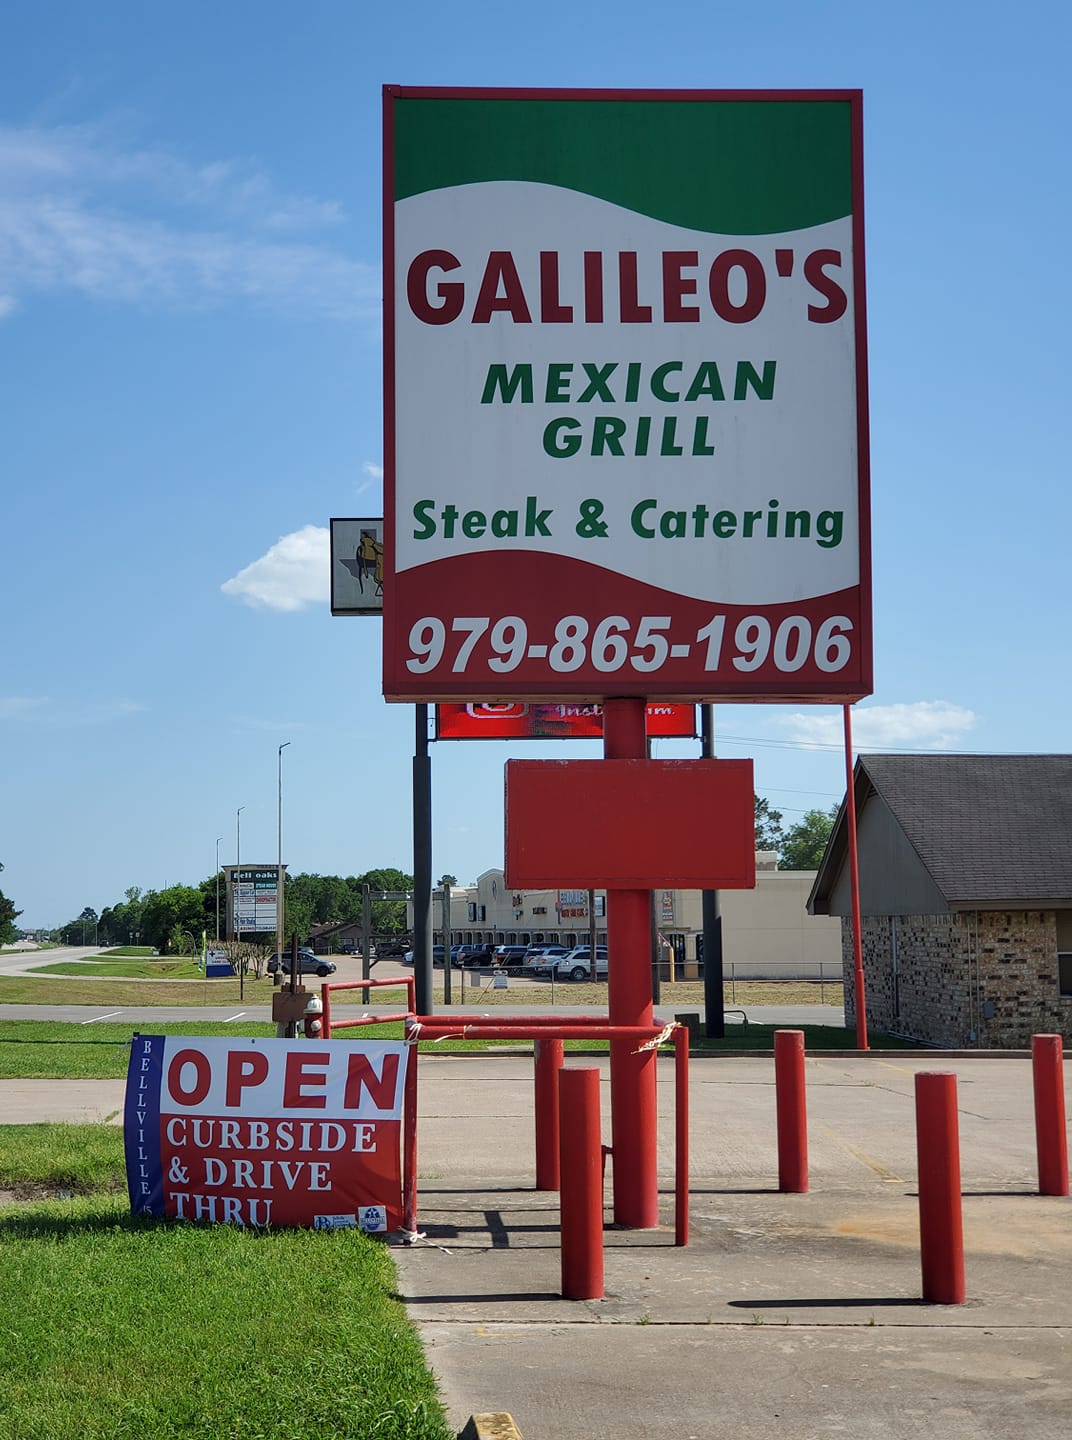 Galileo's Mexican Grill